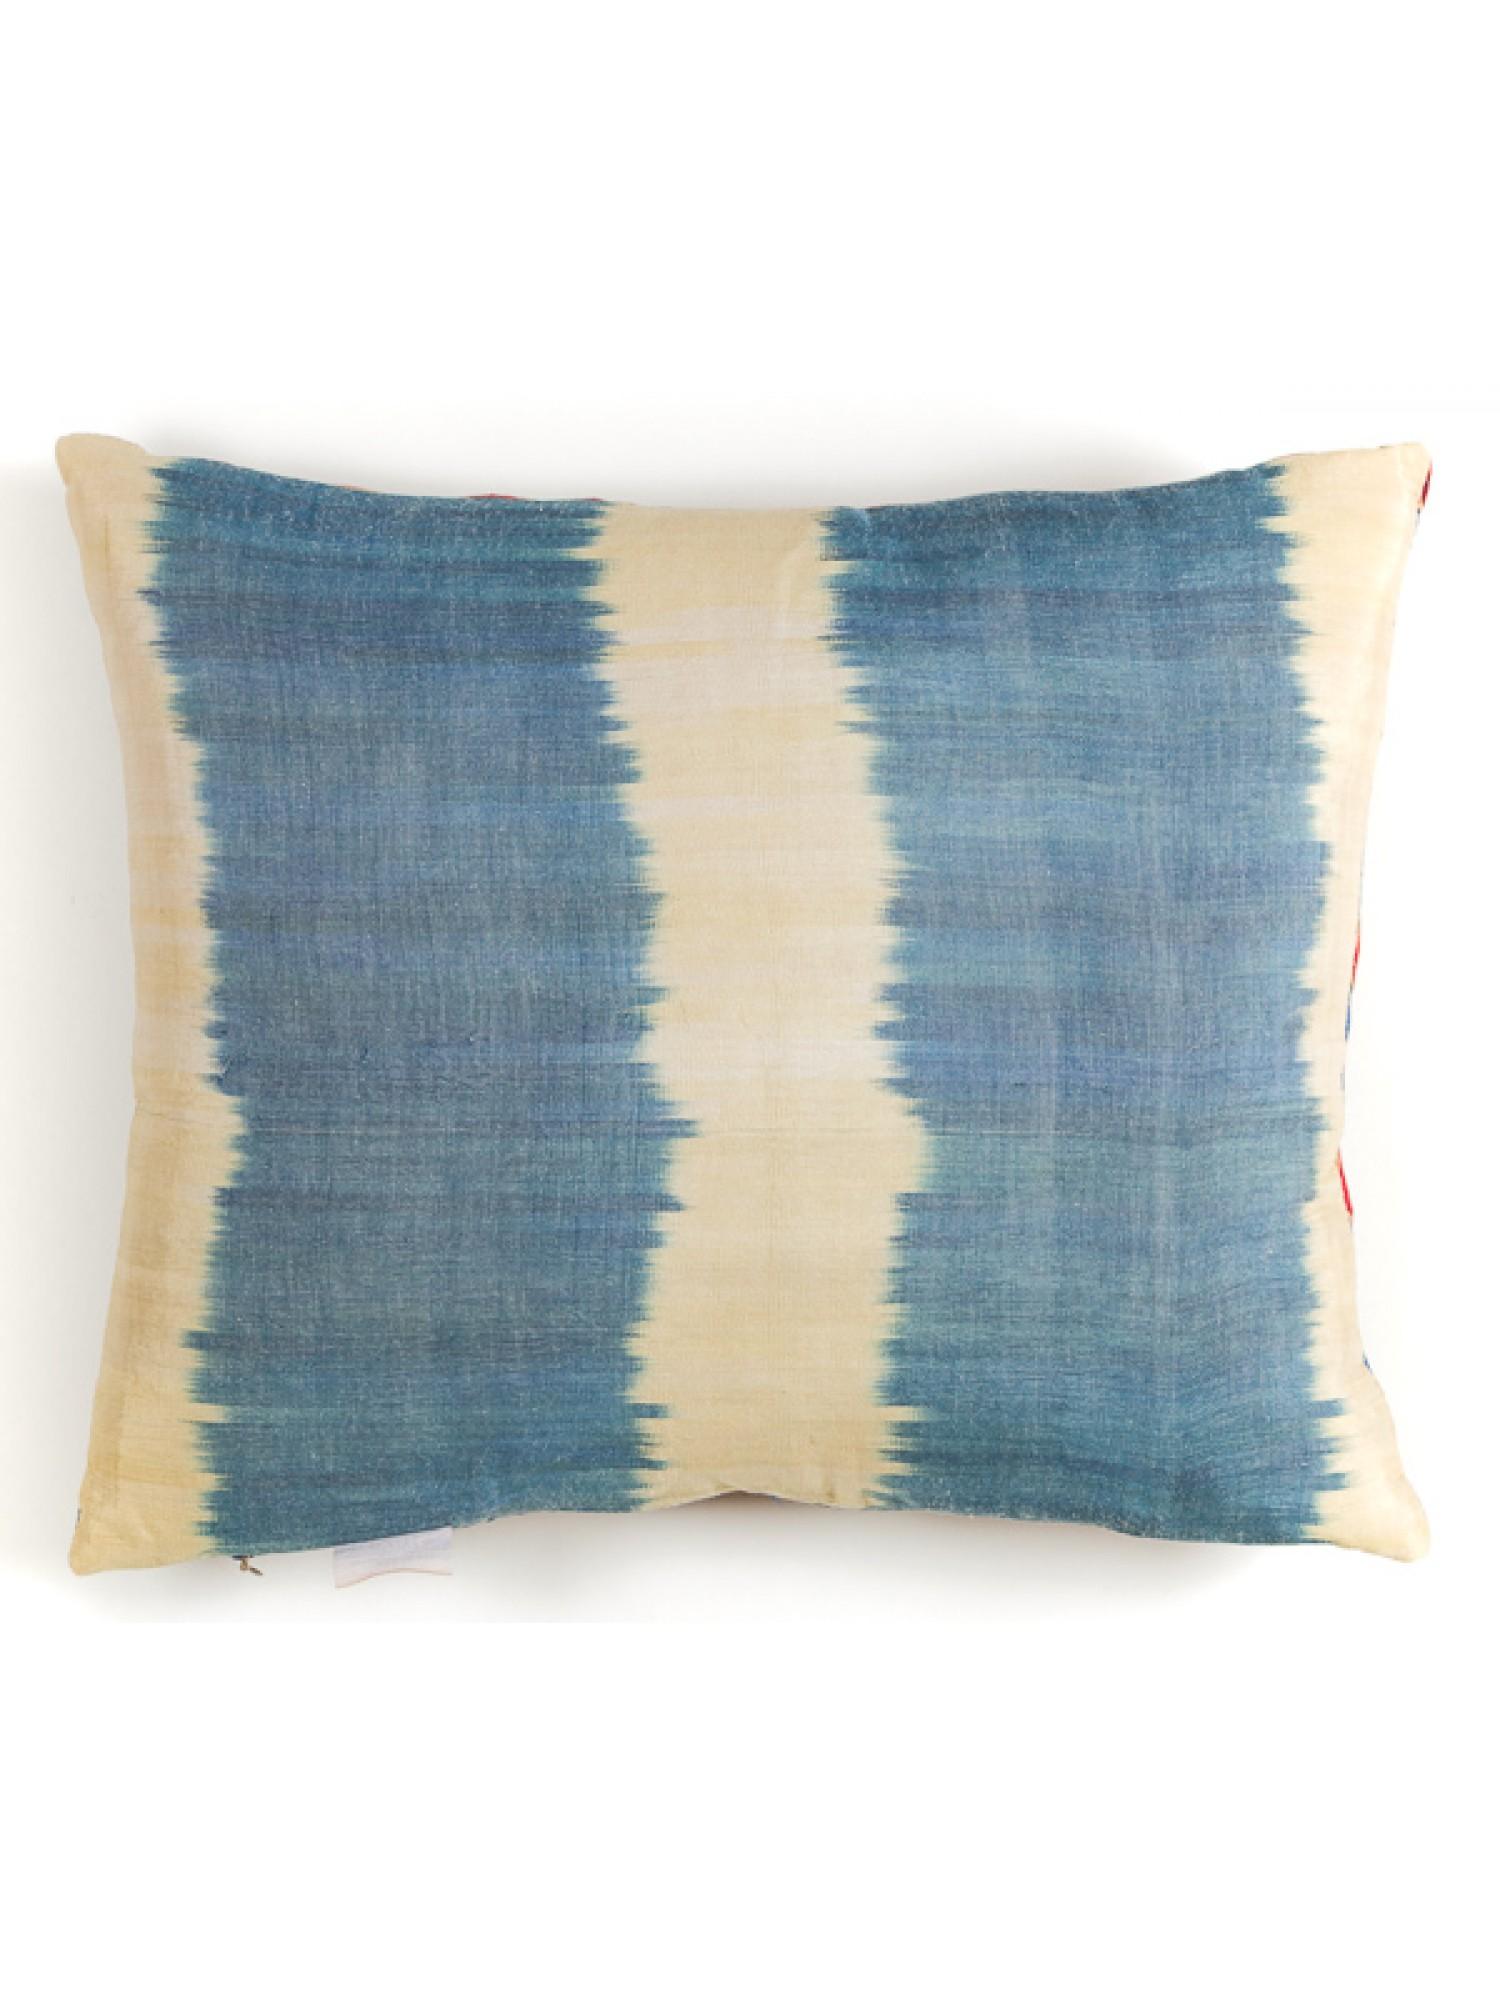 This cushion is made from all-natural materials.
Front side, the fabric of this hand-embroidered Suzani is 80% silk, 20% cotton, and the embroidery thread is 100% silk.
Back side, the ikat is %100 silk. The ikat on the back and the embroidery